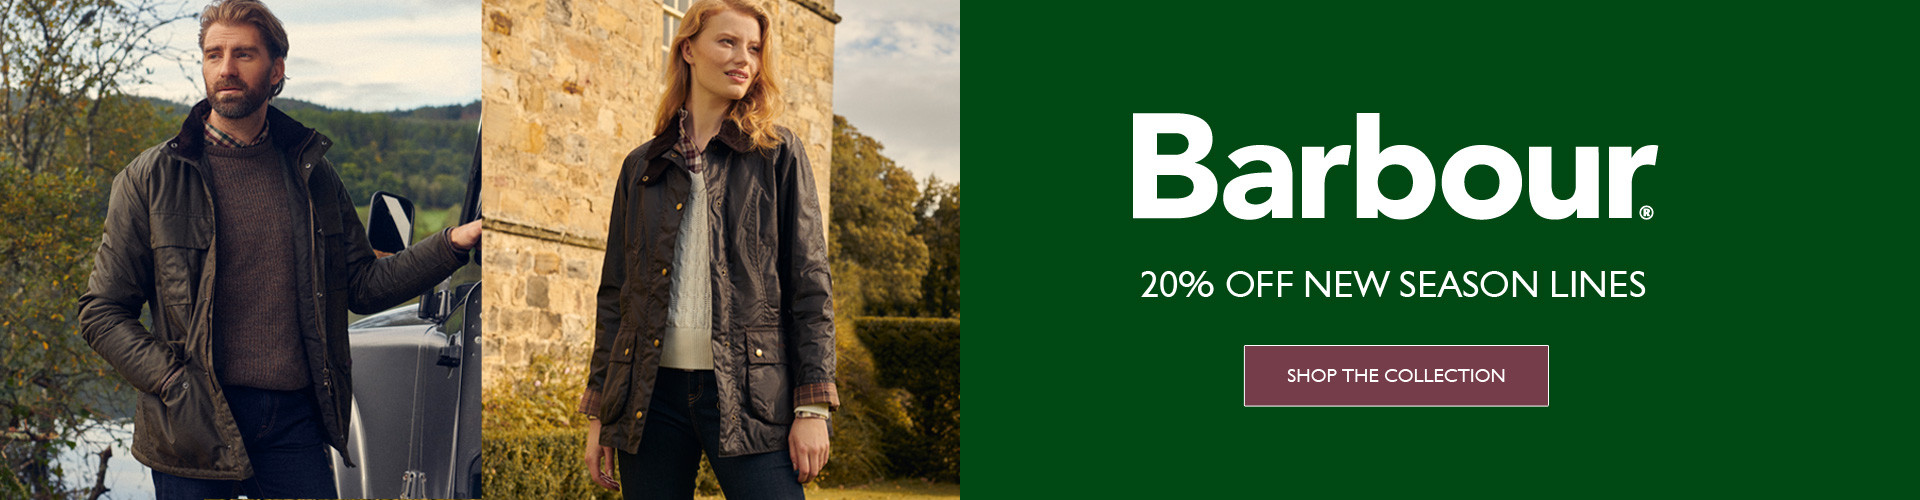 Barbour 20% OFF New Season Lines | Shop the Collection